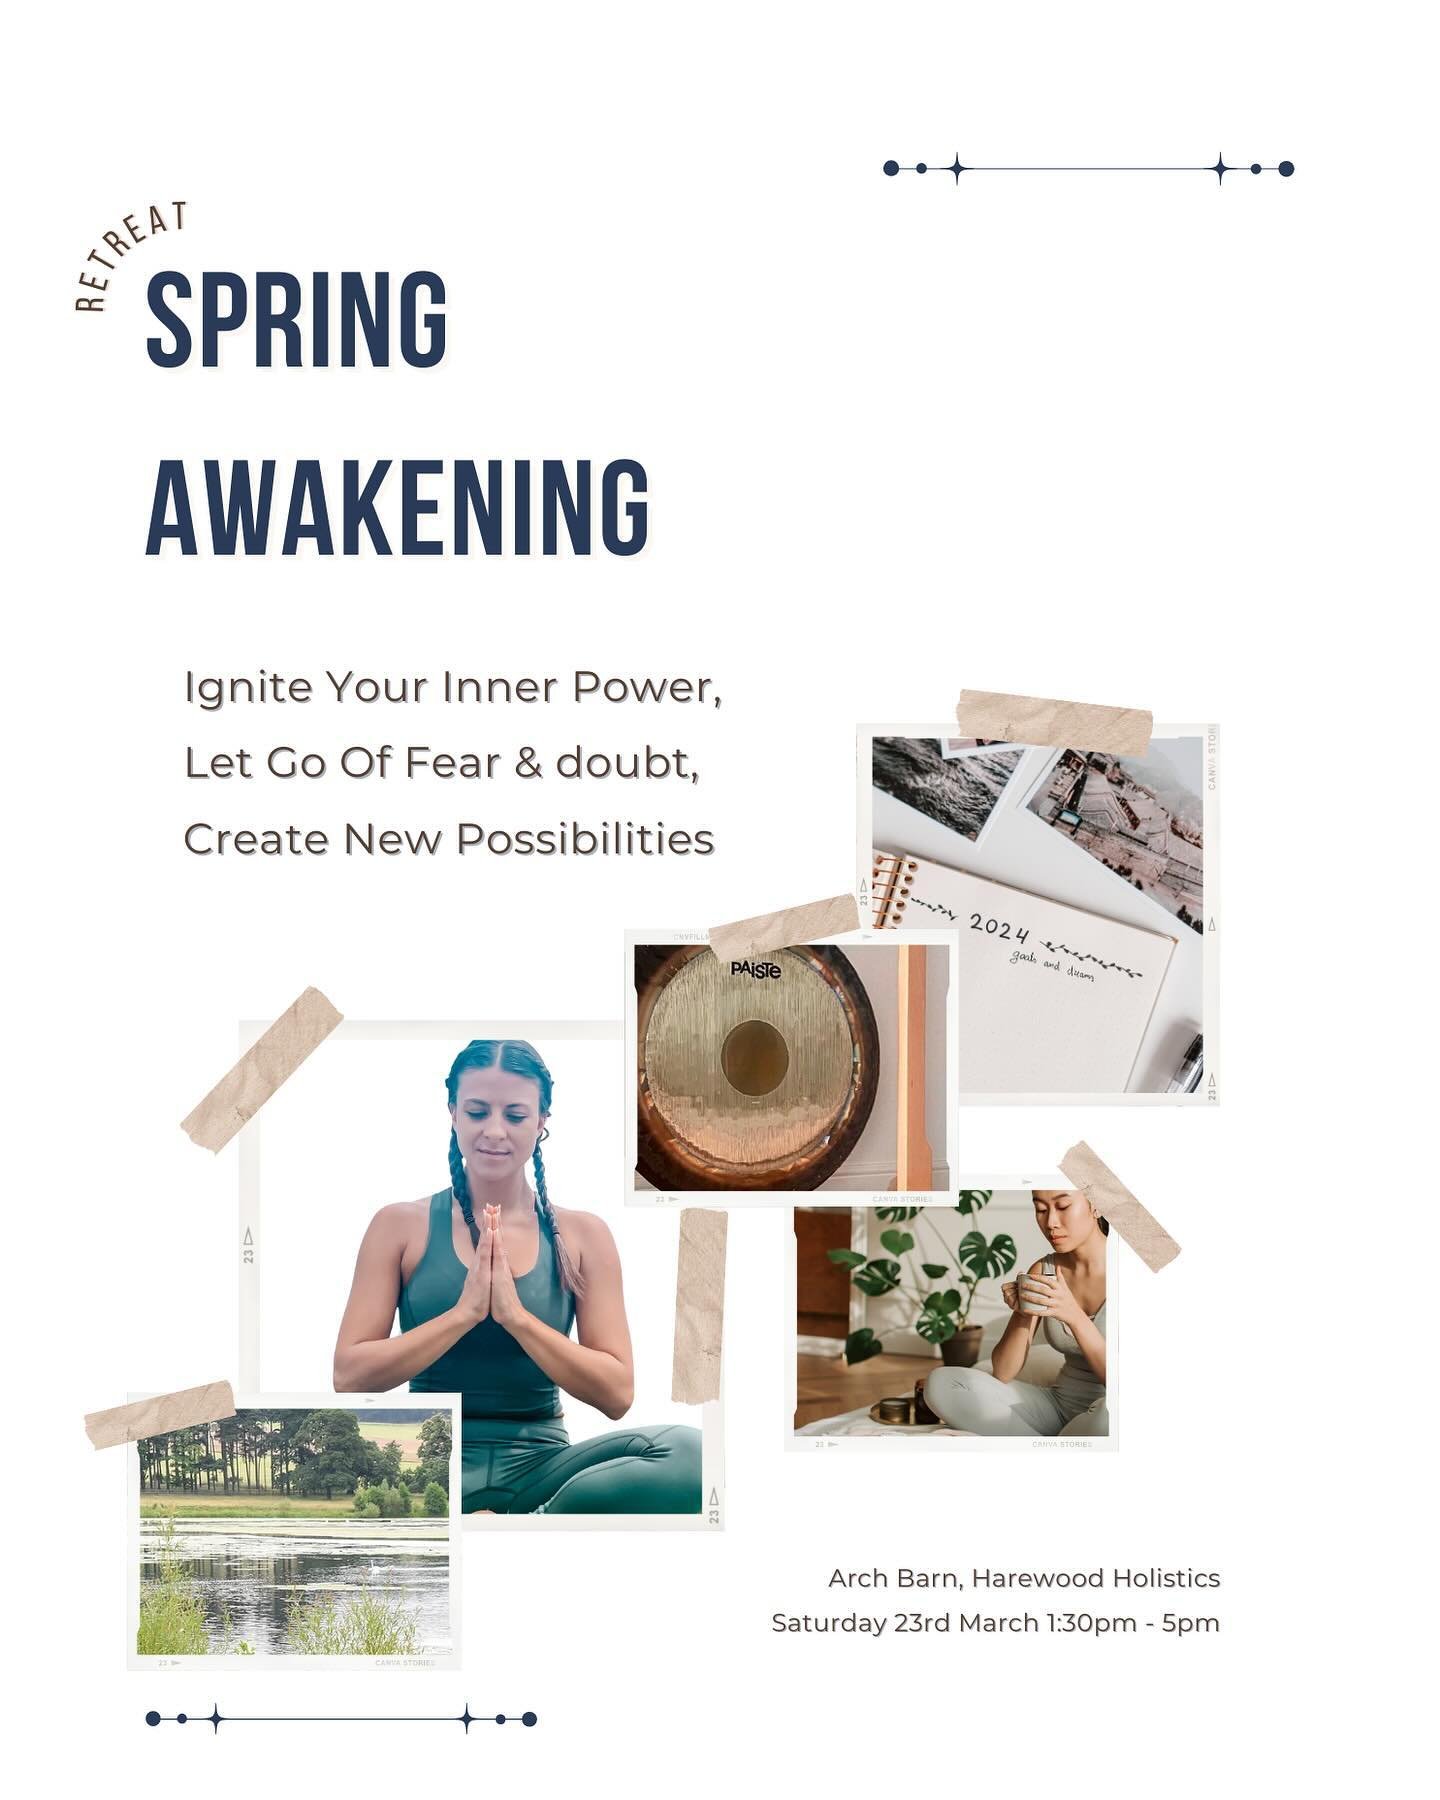 Spring Awakening

Ignite Your Inner Power, Let Go Of Fear &amp; doubt,
Create New Possibilities

Saturday 23rd March.
1:30pm - 5pm. Arrive from 1:15pm
Arch Barn, Harewood Holistics

Yoga Flow

Move stagnant energy to slow down a busy mind, paving the